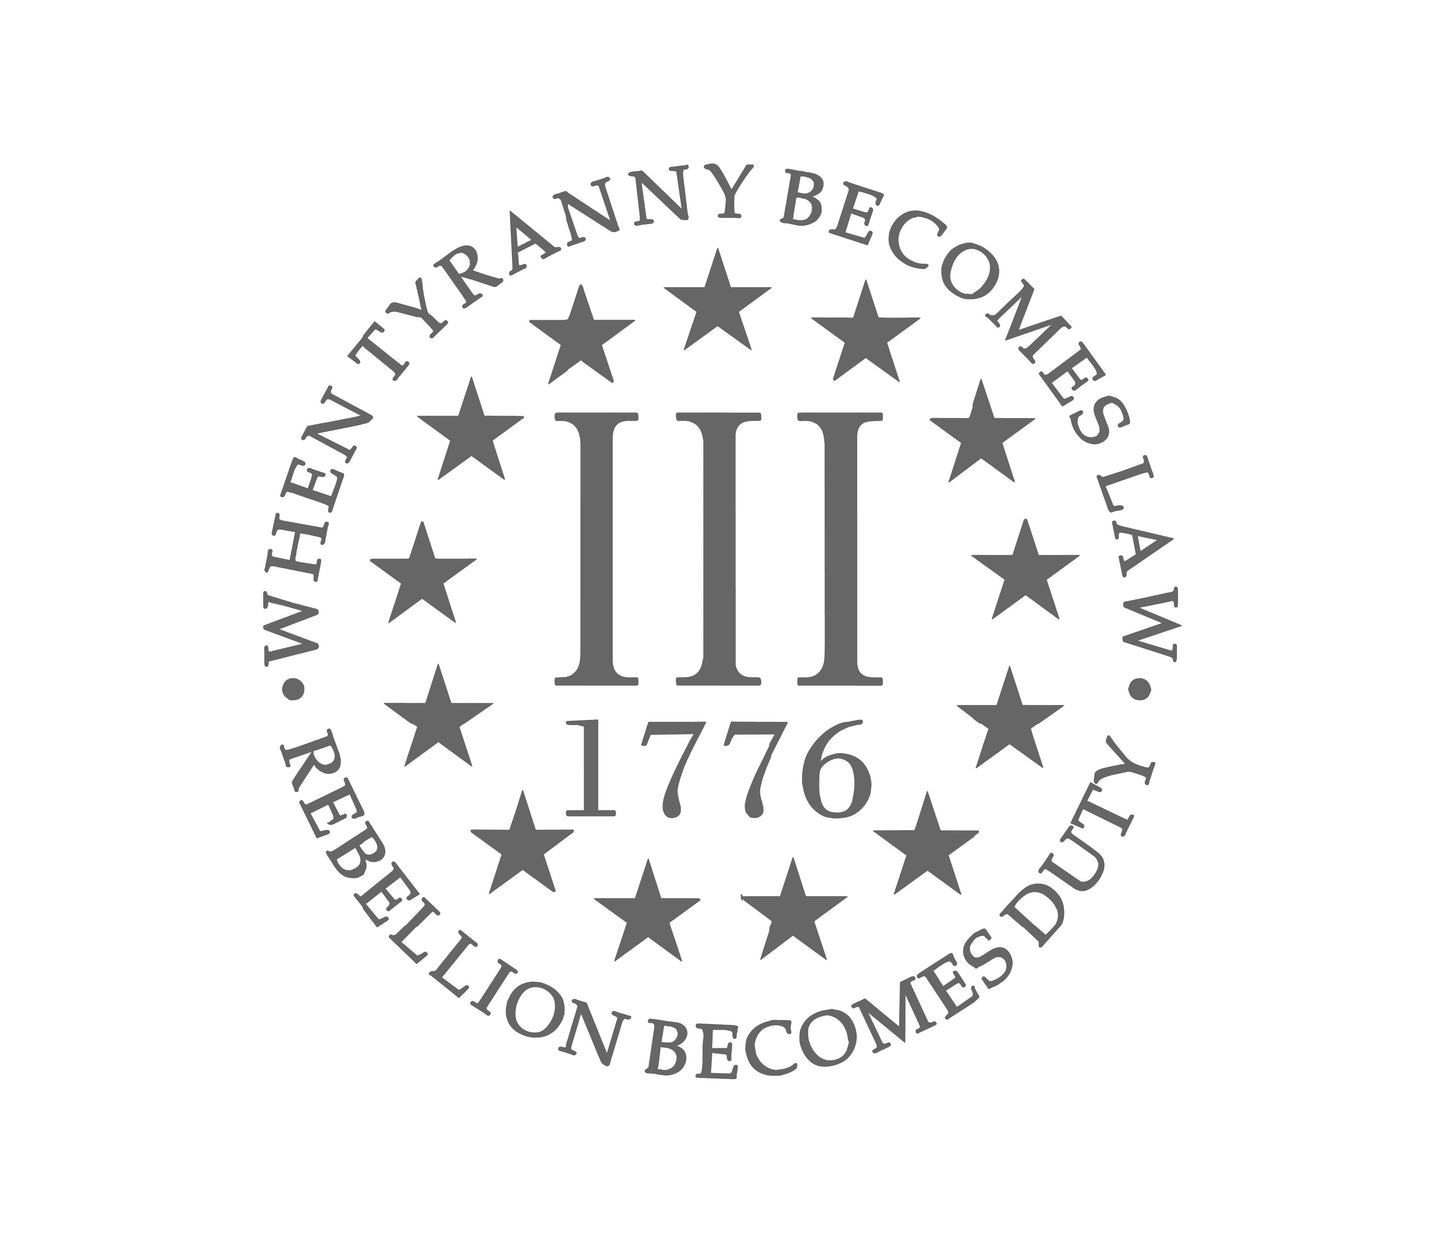 When Tyranny Becomes Law Rebellion Becomes Duty Patriot Party of the United States Lion Party 1776 America Car Decal